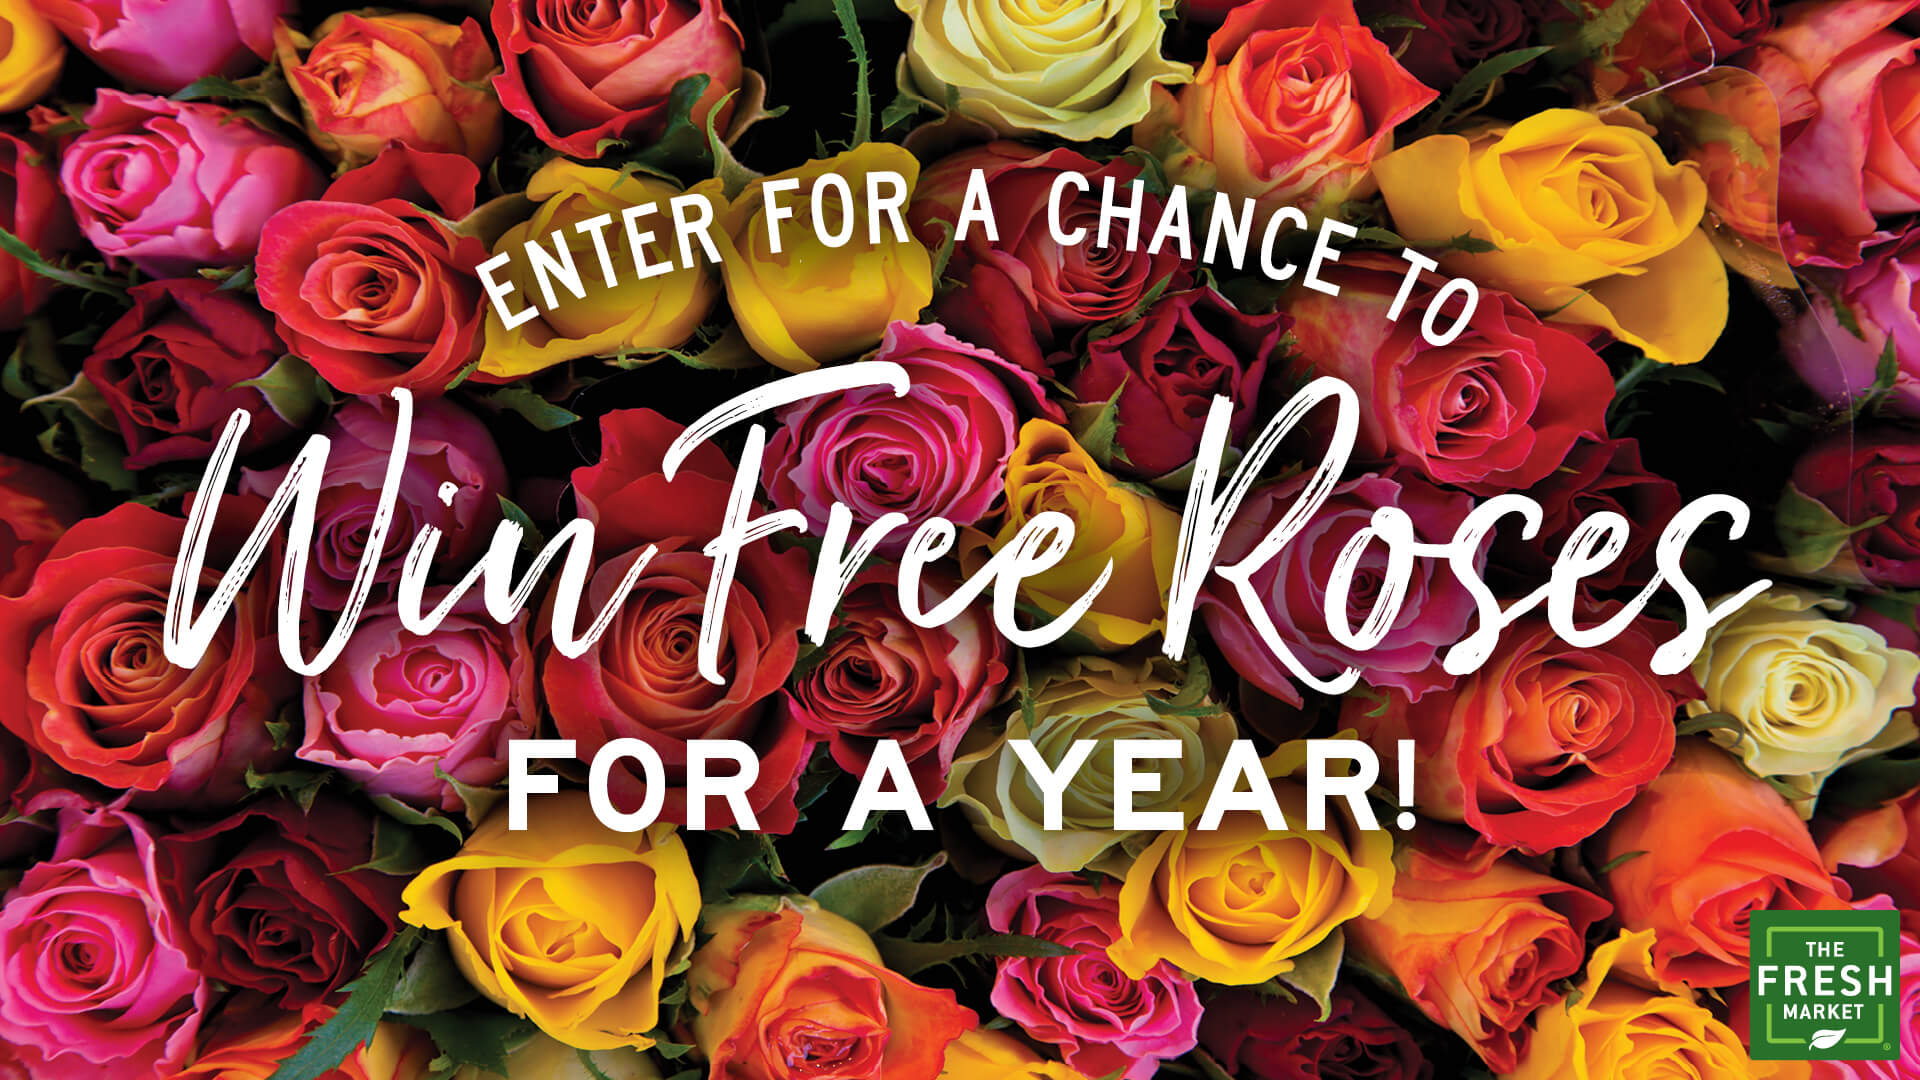 tfm free roses for a year hero